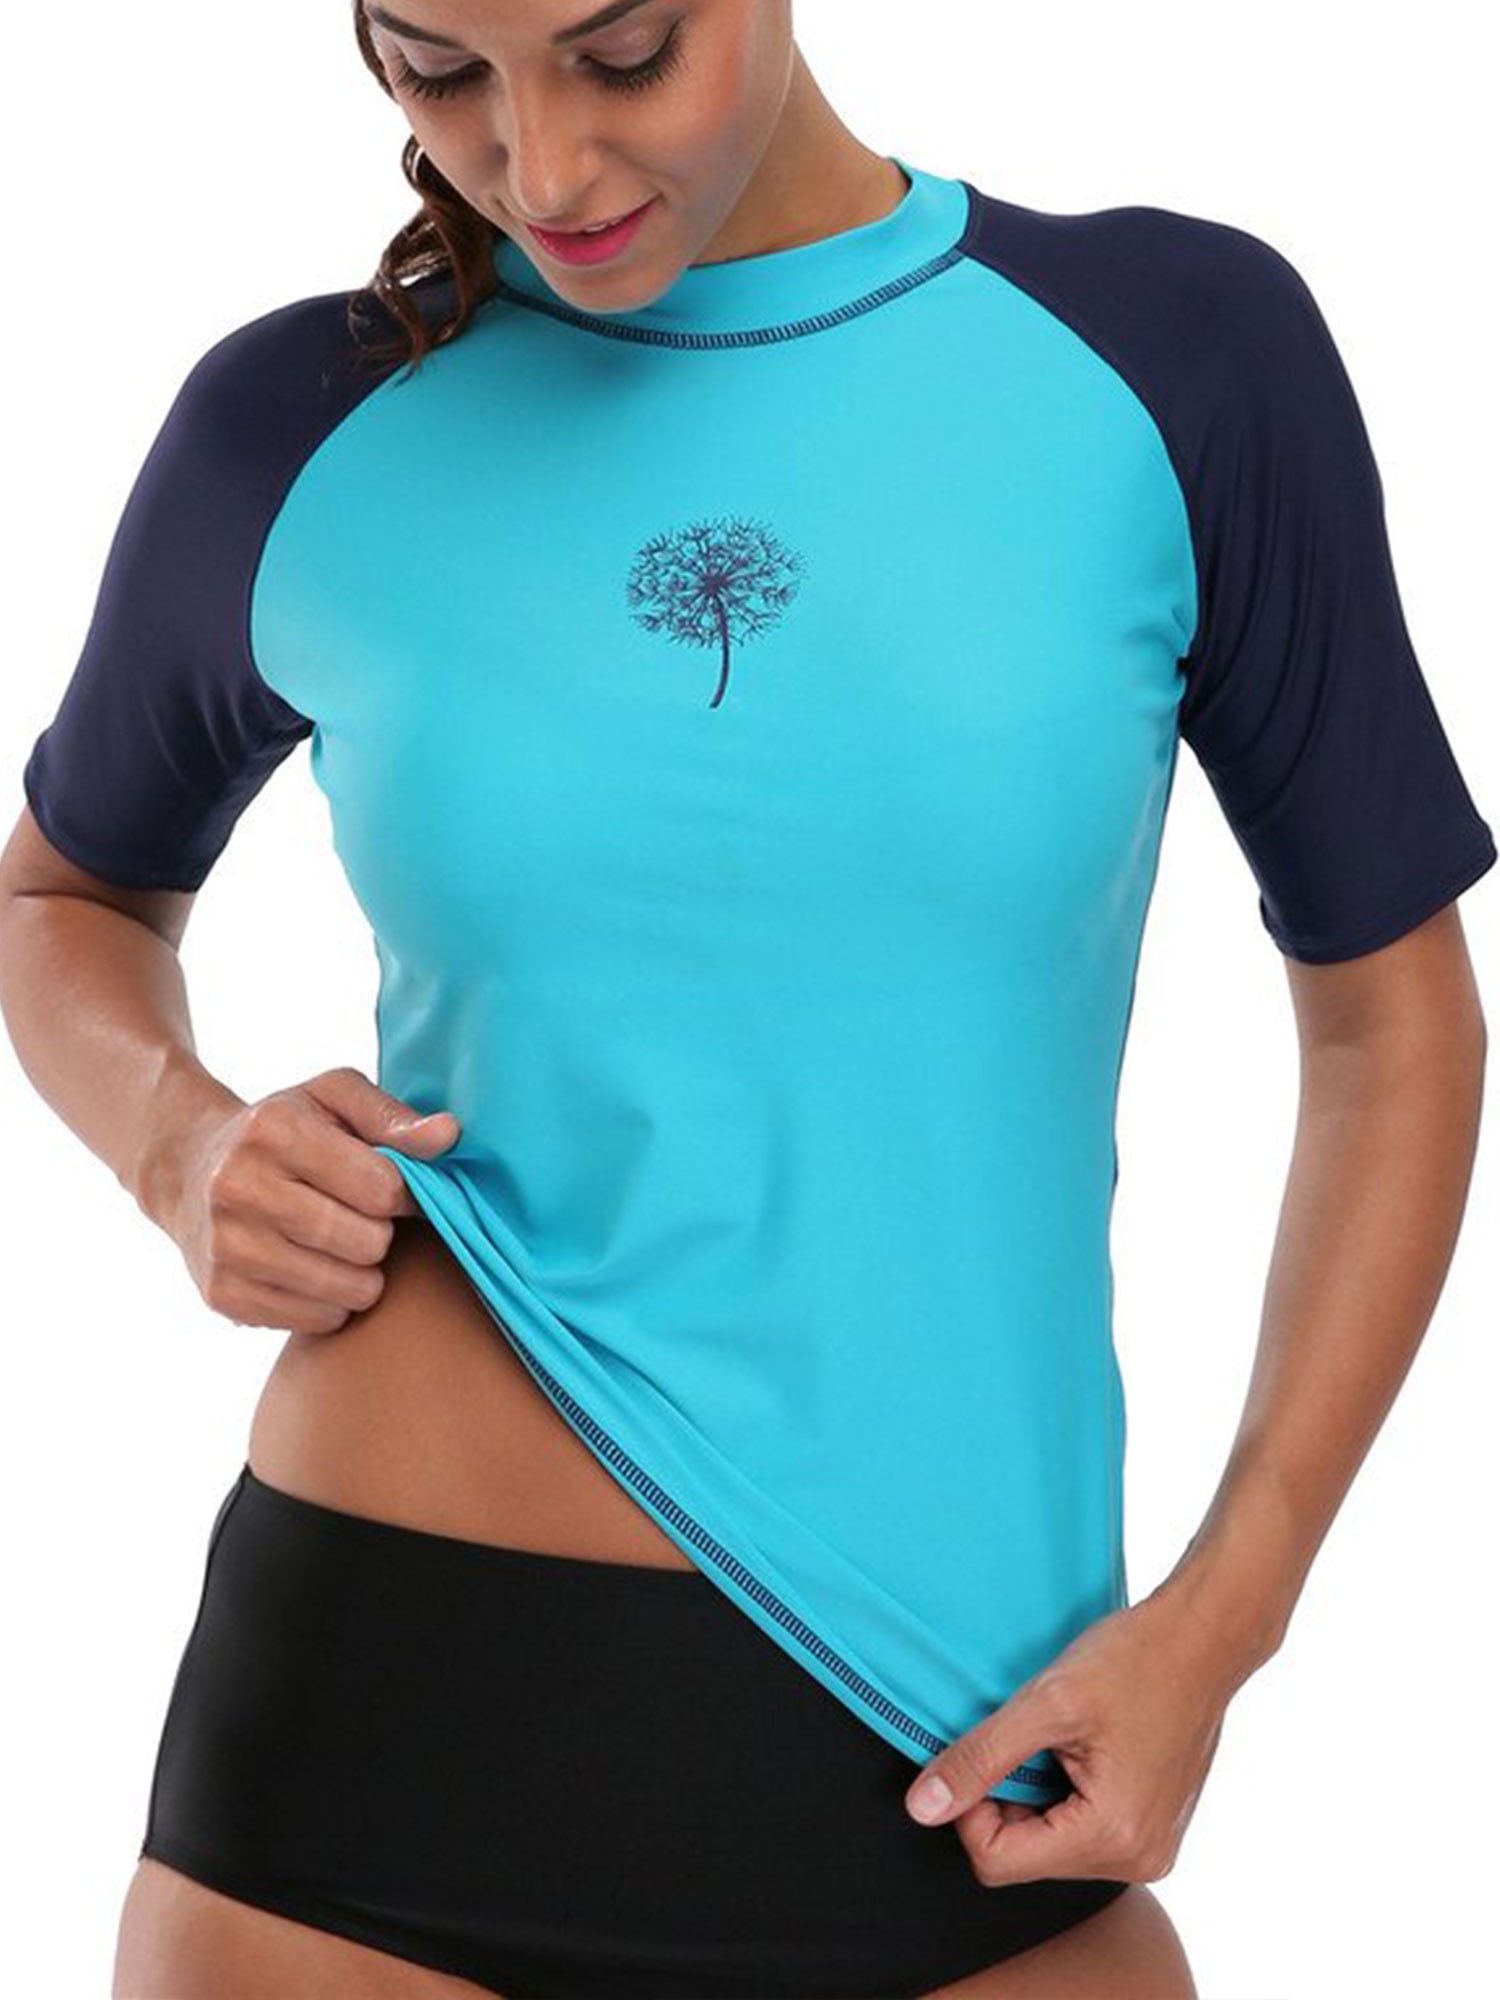 Womens Rash Guard Short Sleeve UPF 50 Outdoor Summer Athletic Workout Tops Swimwear Shirts Quick Dry Swimsuit Top